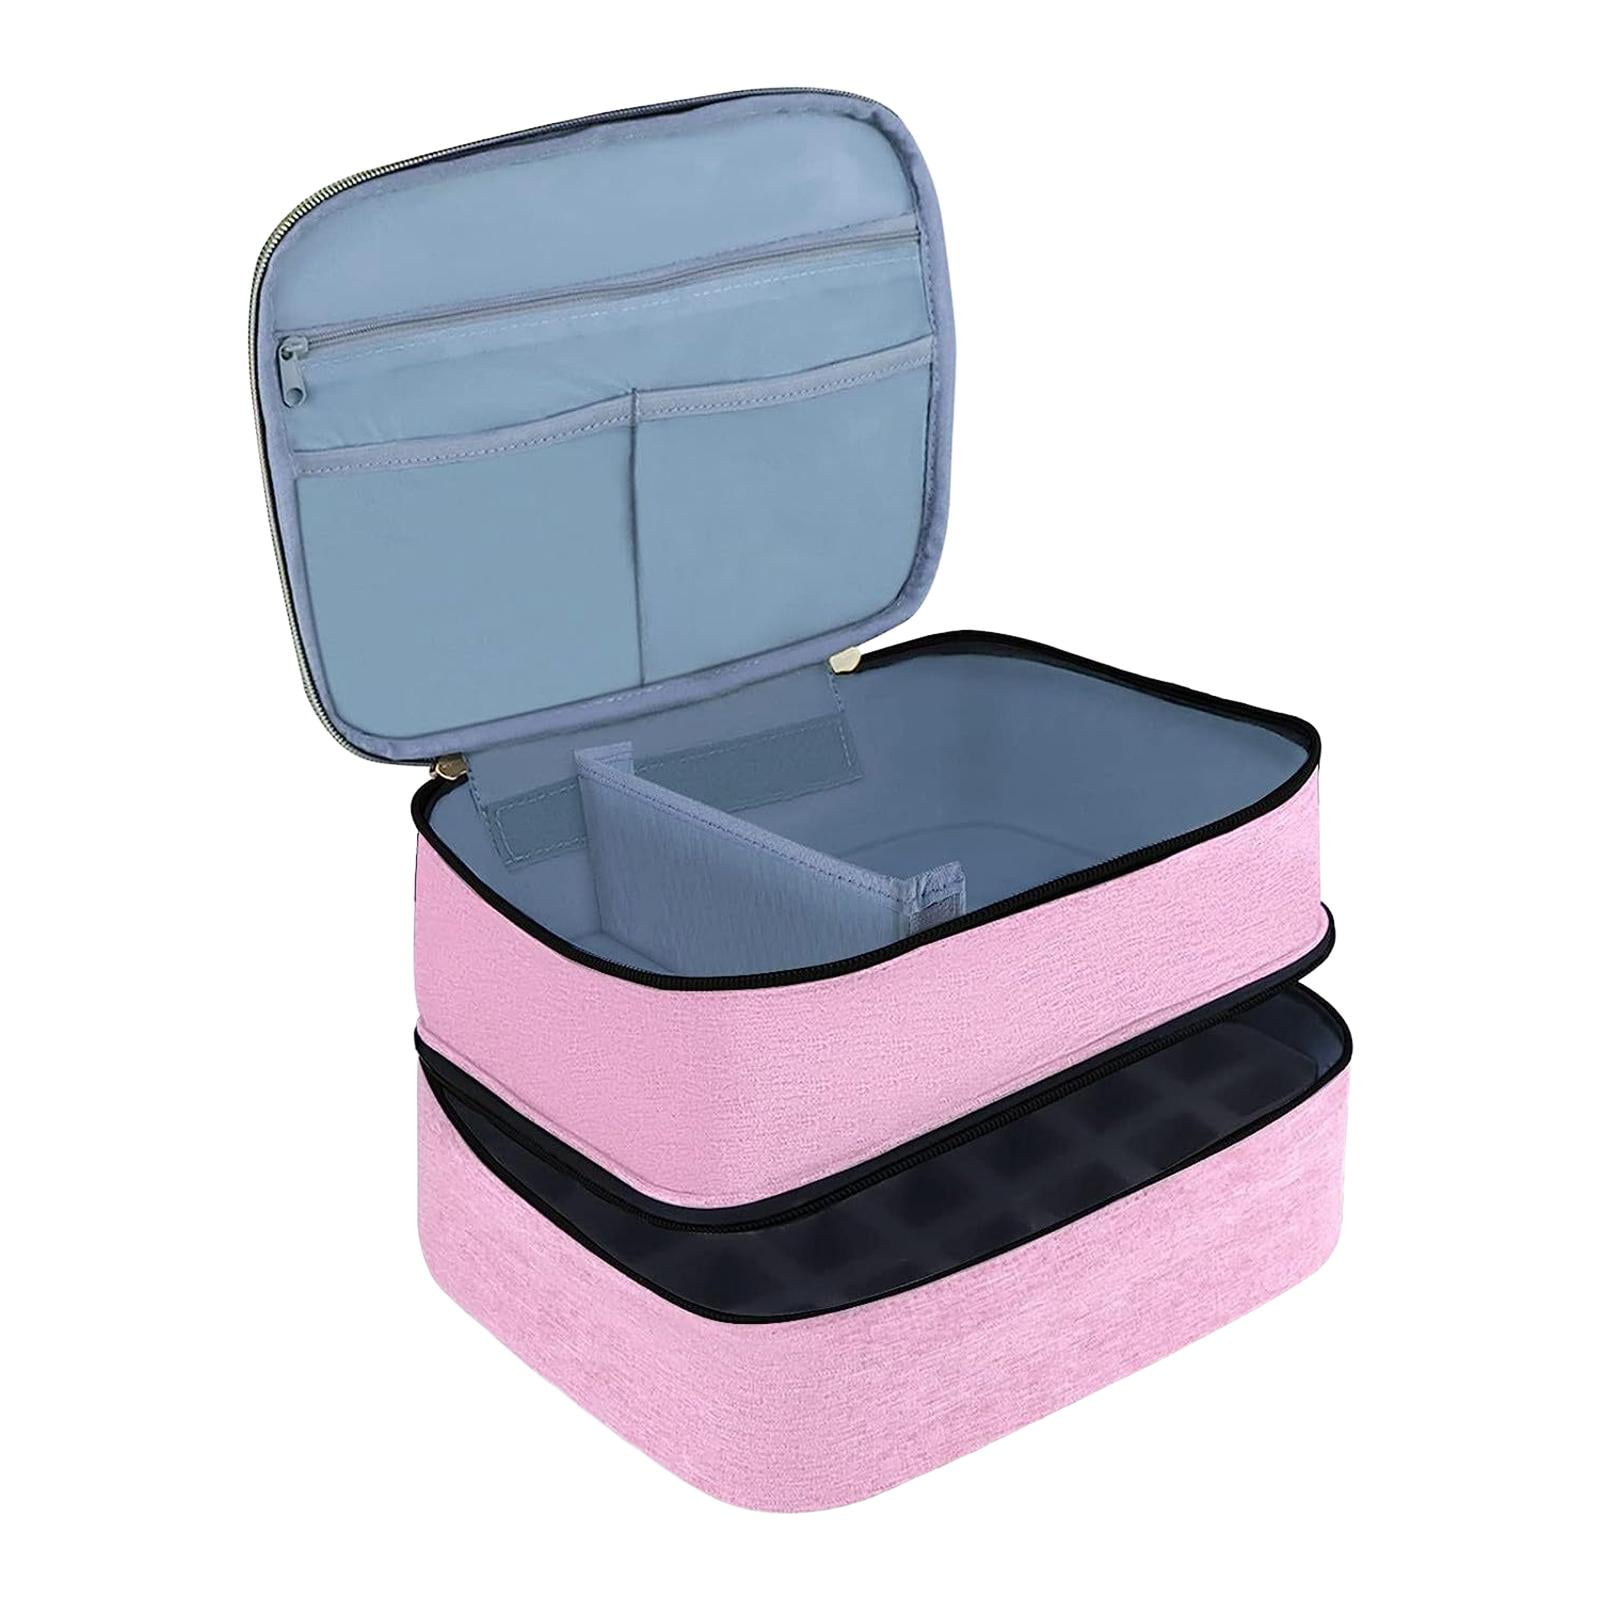 Glamlily Nail Polish Organizer Case with Lid and Handle, Holds 30 Bottles  (Pink, 11.8 x 11.2 x 3.15 In)